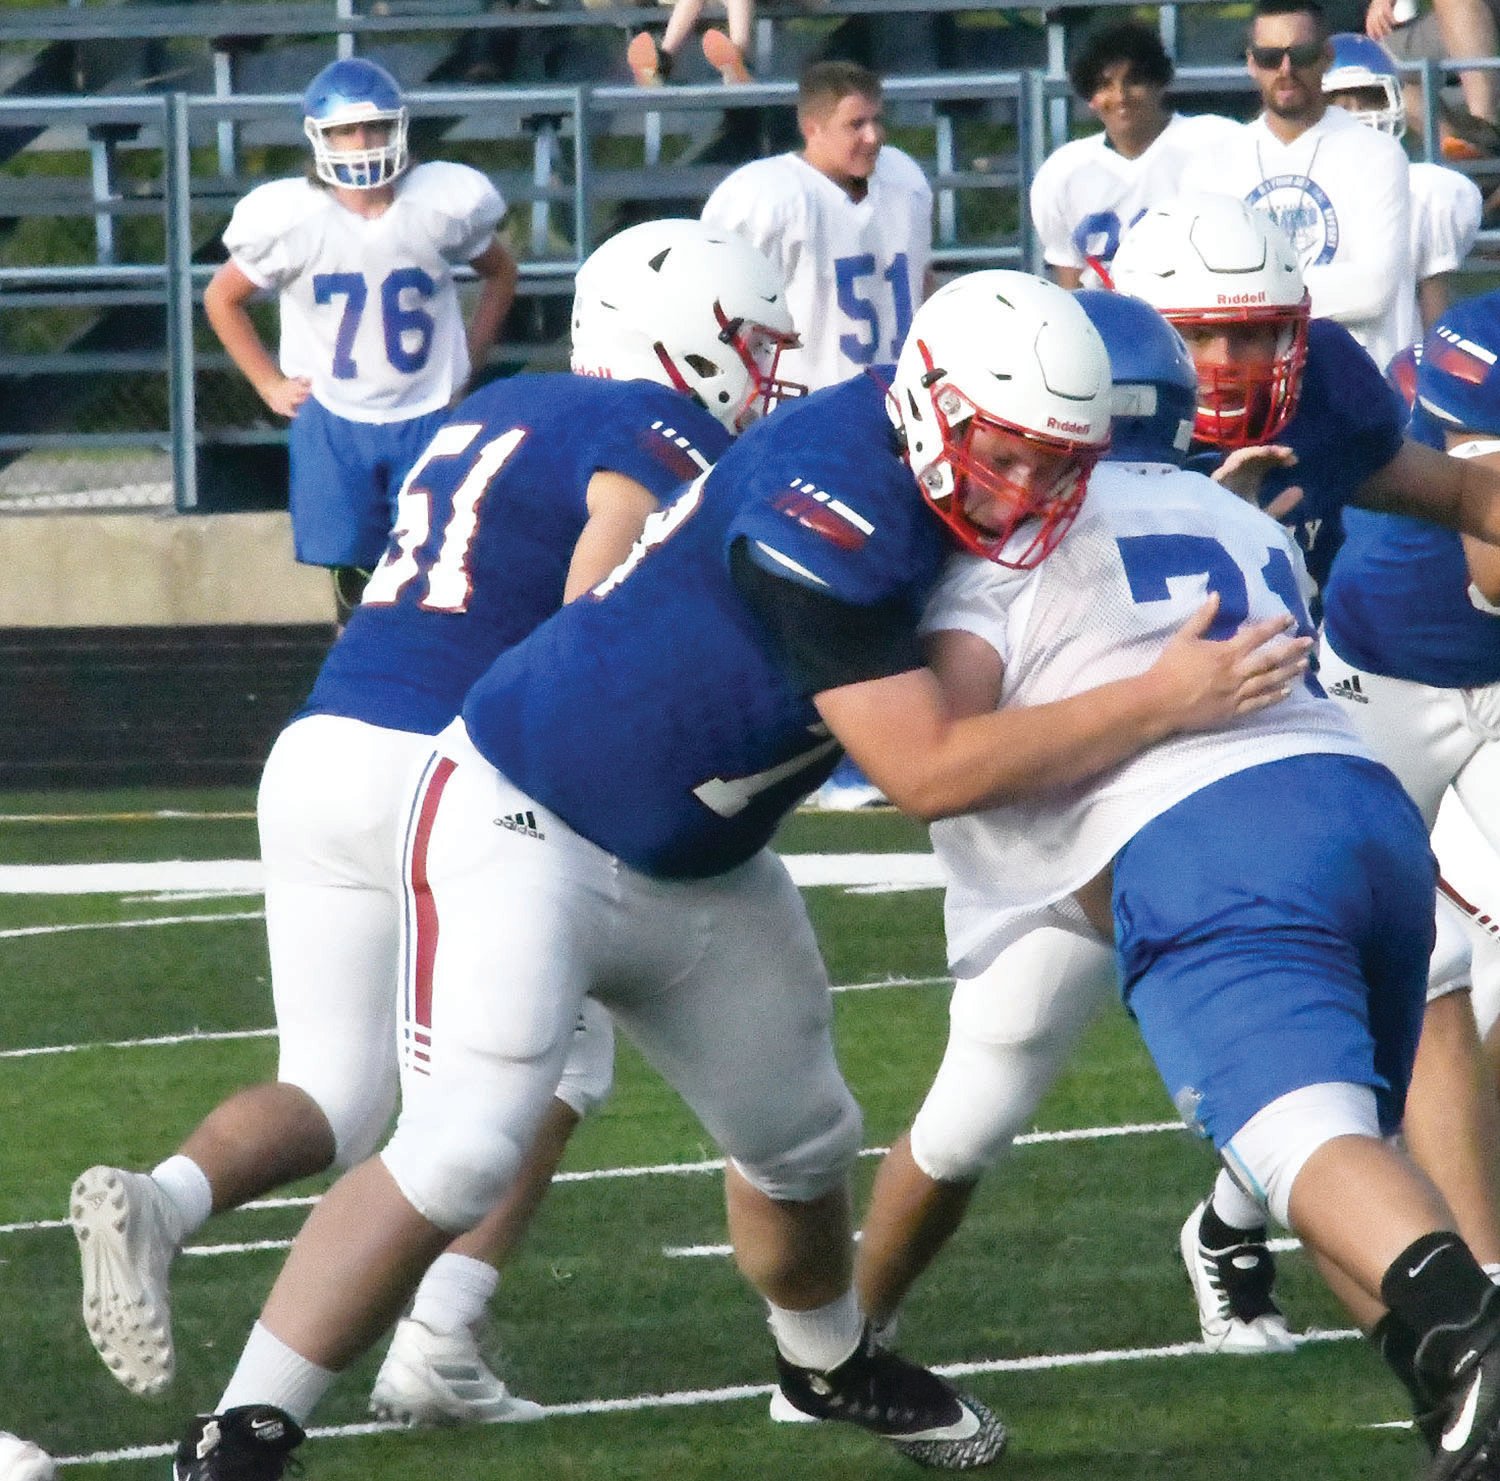 Moberly offensive lineman Mike Goff fends off a Boonville defensive lineman during last Thursday’s Higskin Classic at Dr. Larry K. Noel Spartan Stadium. The Spartans had 30 plays on offense versus Boonville, Southern Boone and Centralia.